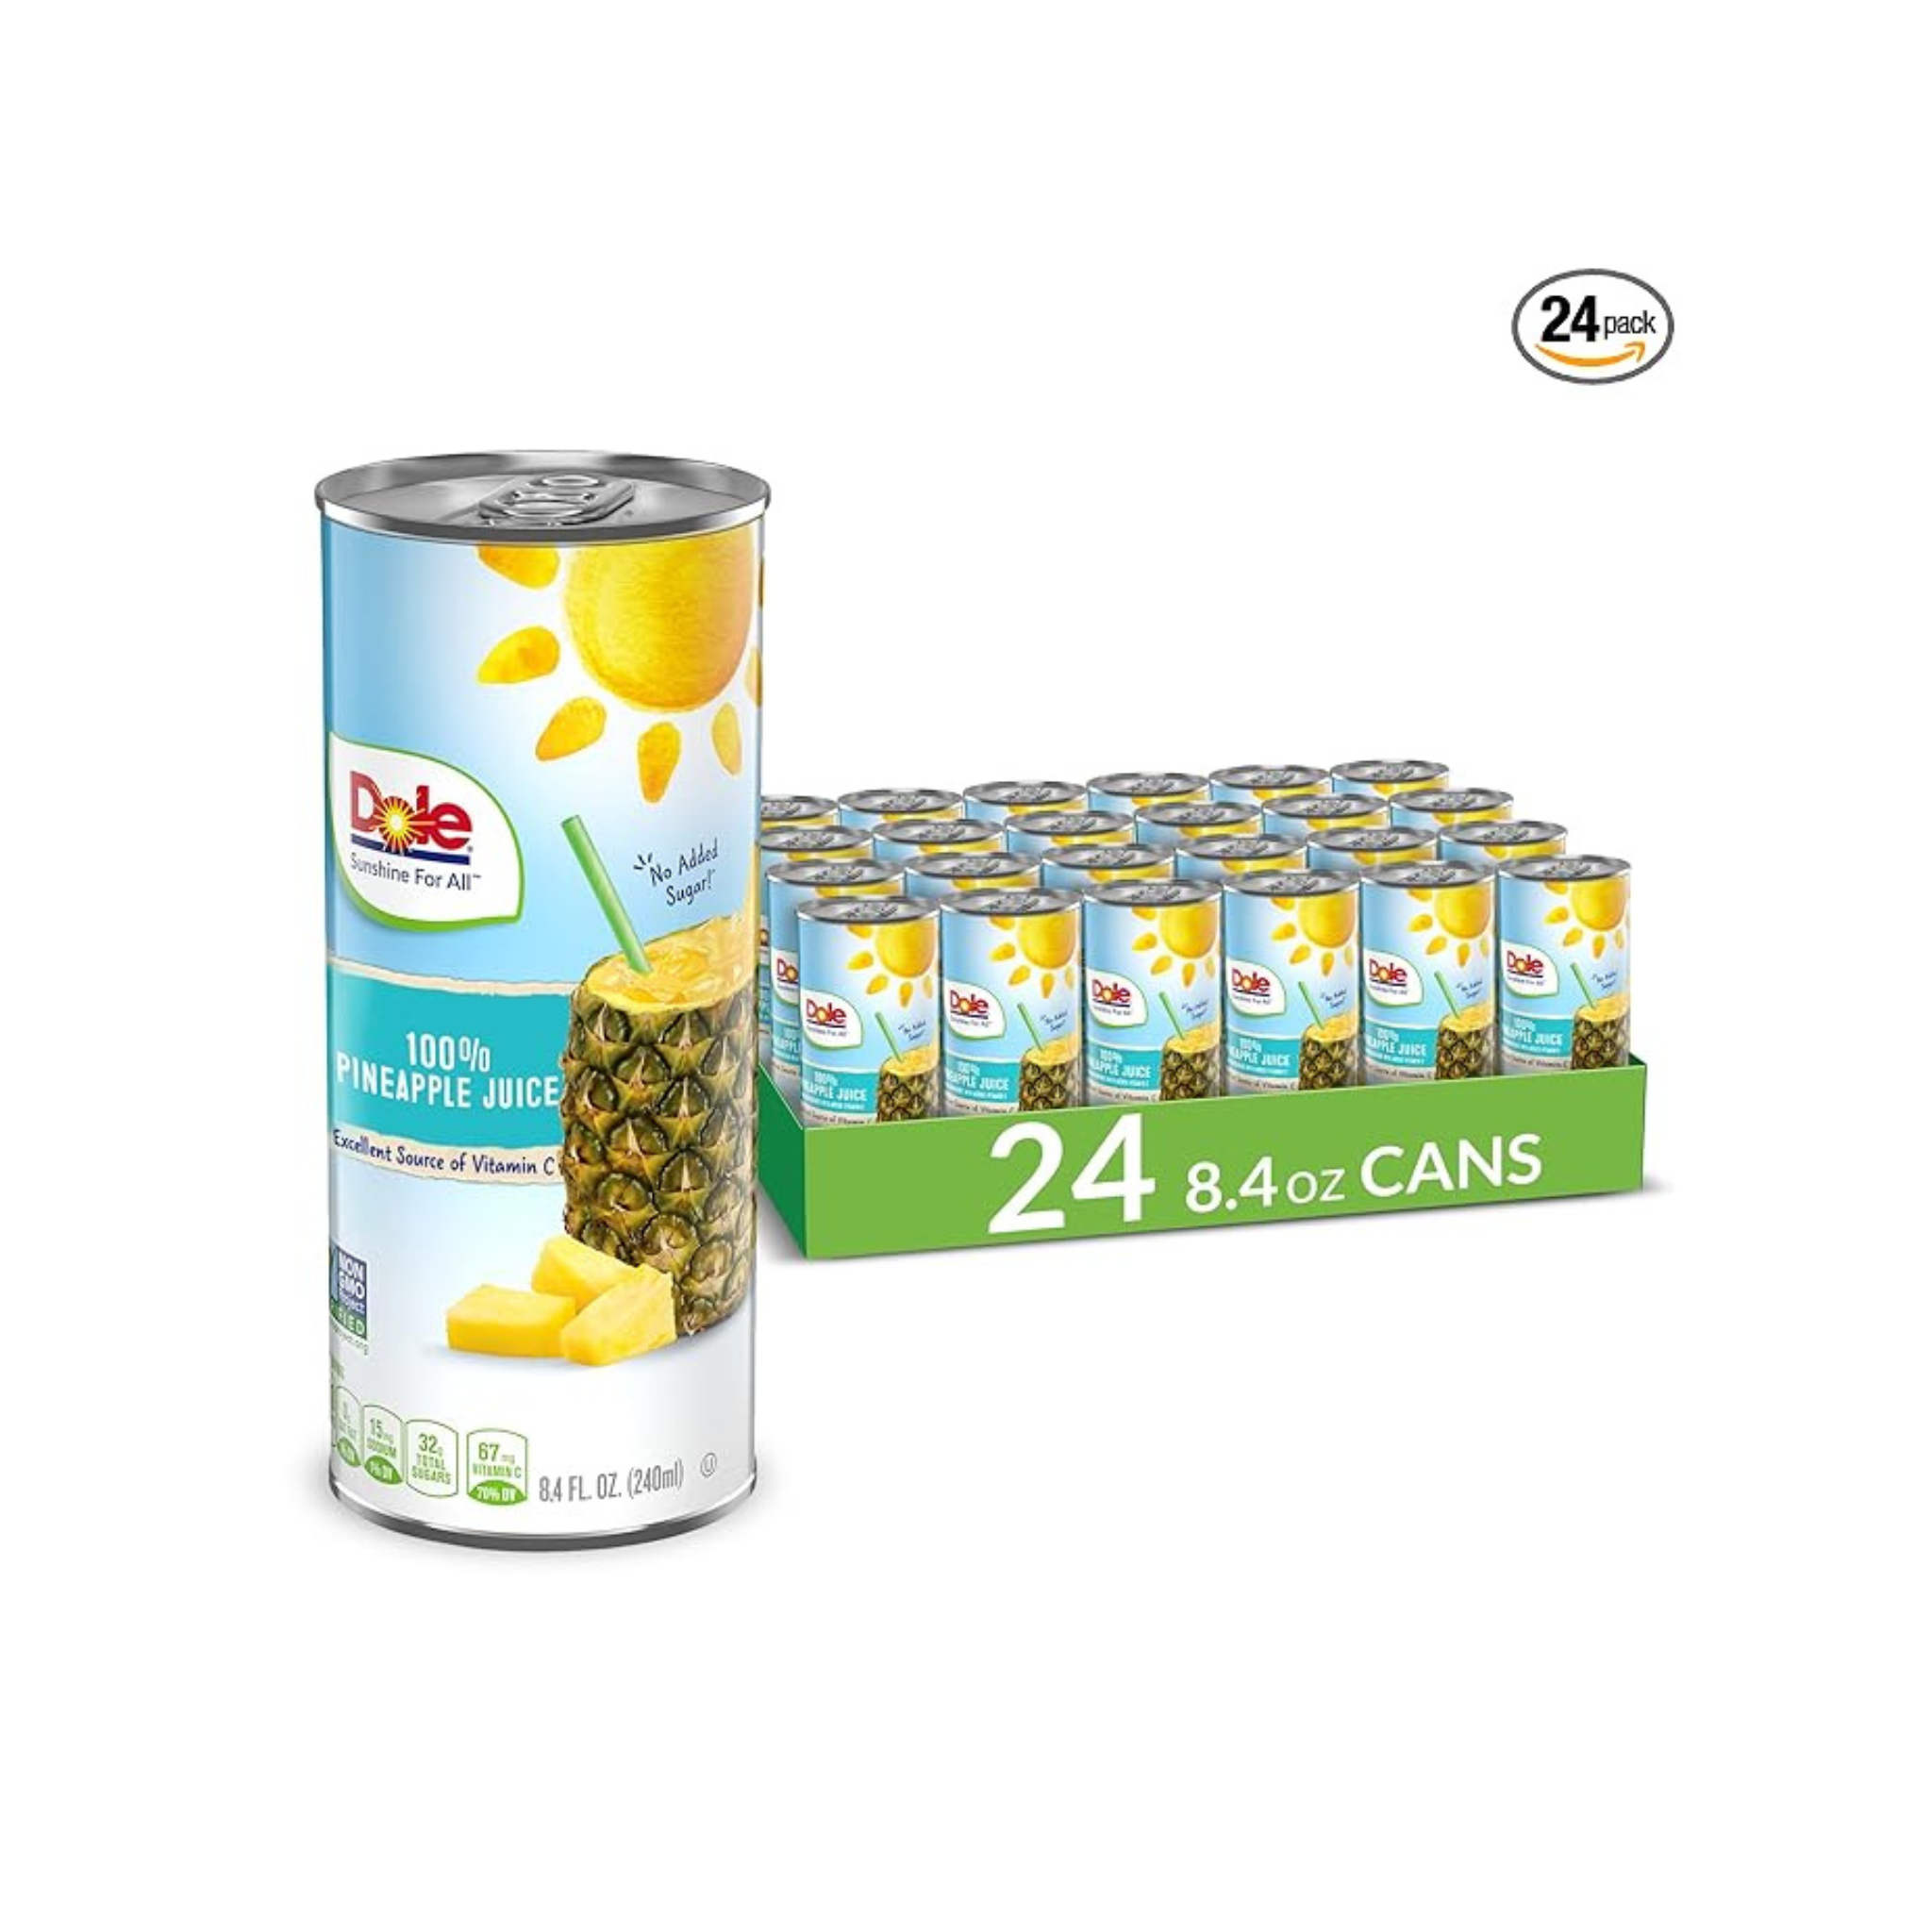 Dole 100% Pineapple Juice with Added Vitamin C, 8.4 Fl Oz Cans (Pack of 24)